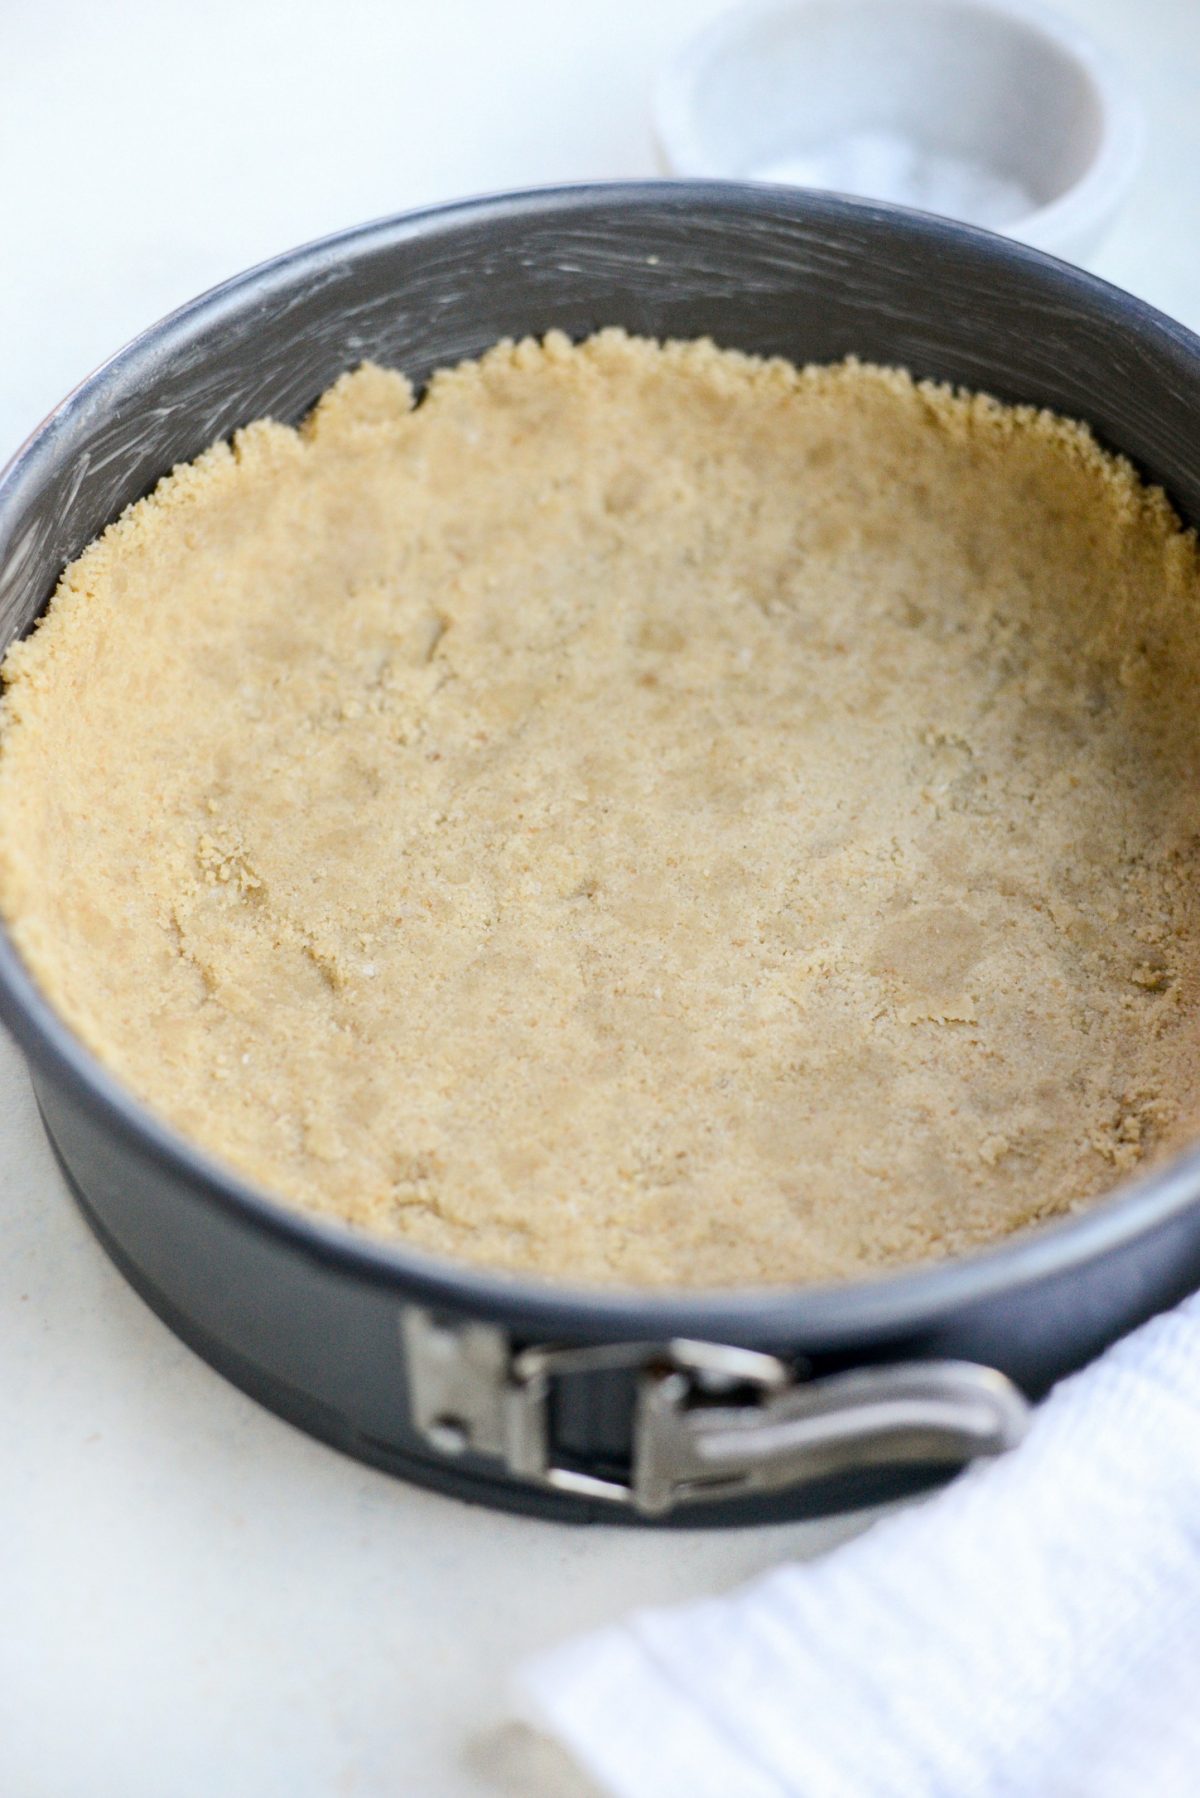 press crust into greased pan.